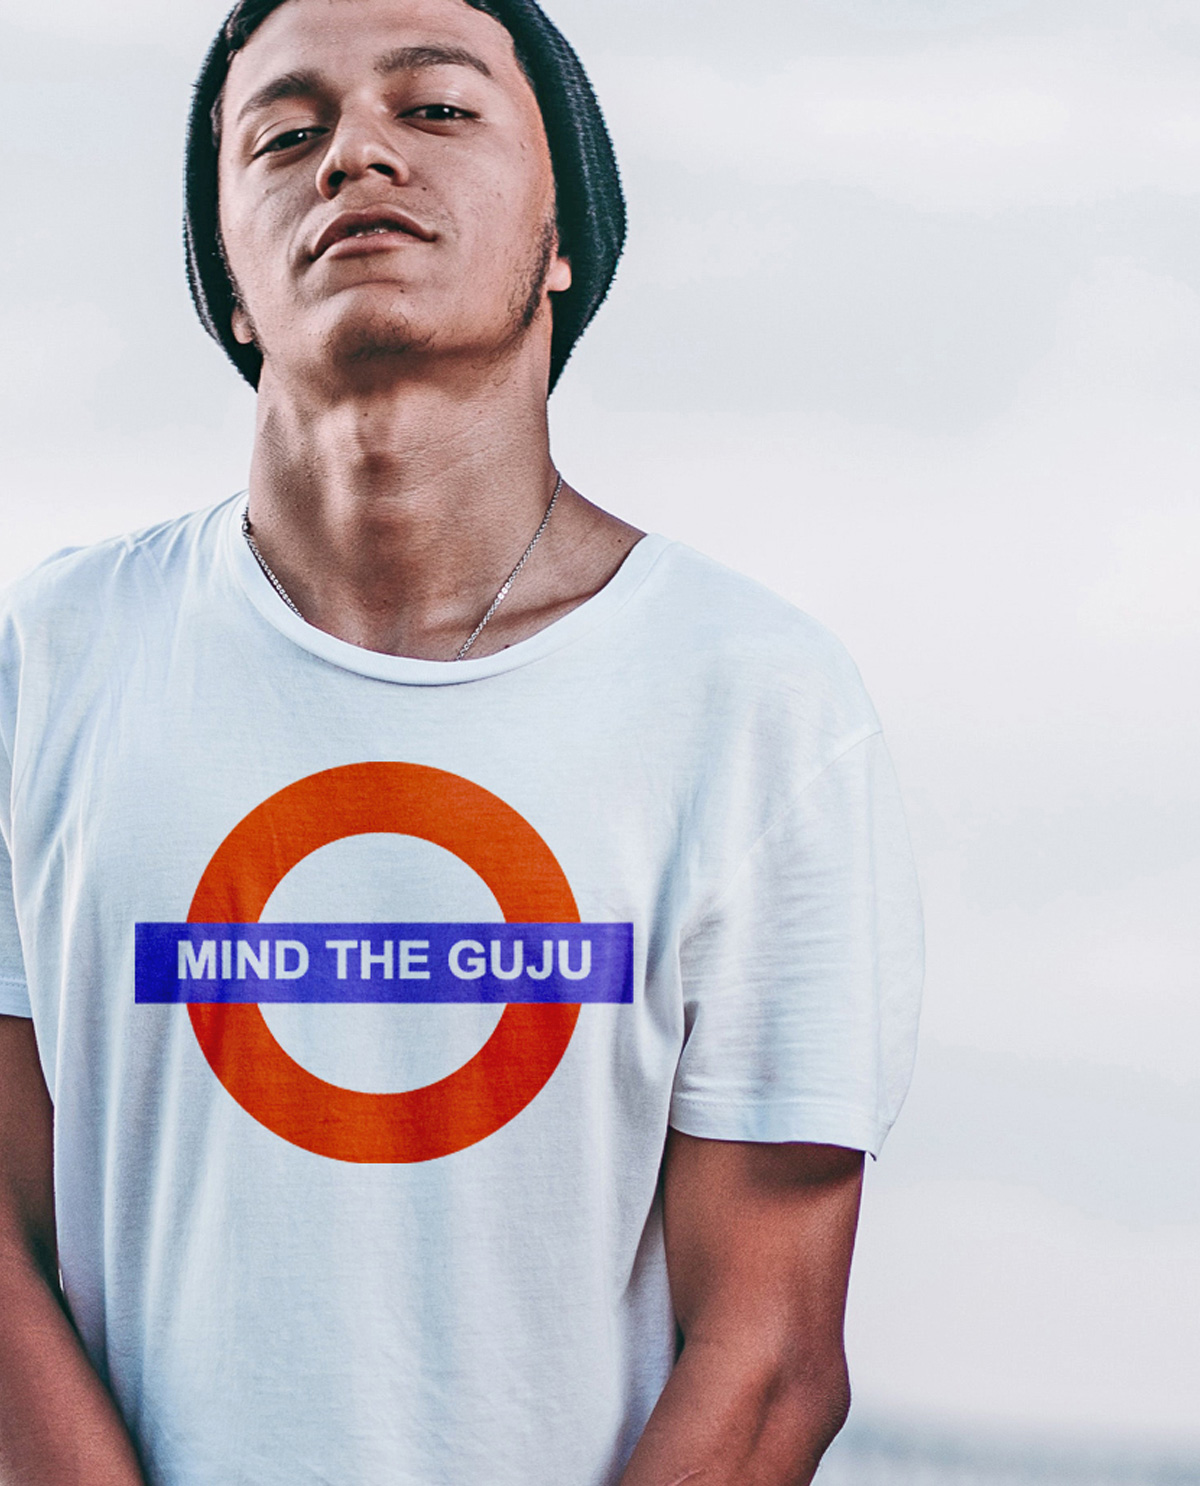 South Asian male model wearing white tshirt with graphic design print on front that says Mind The Guju